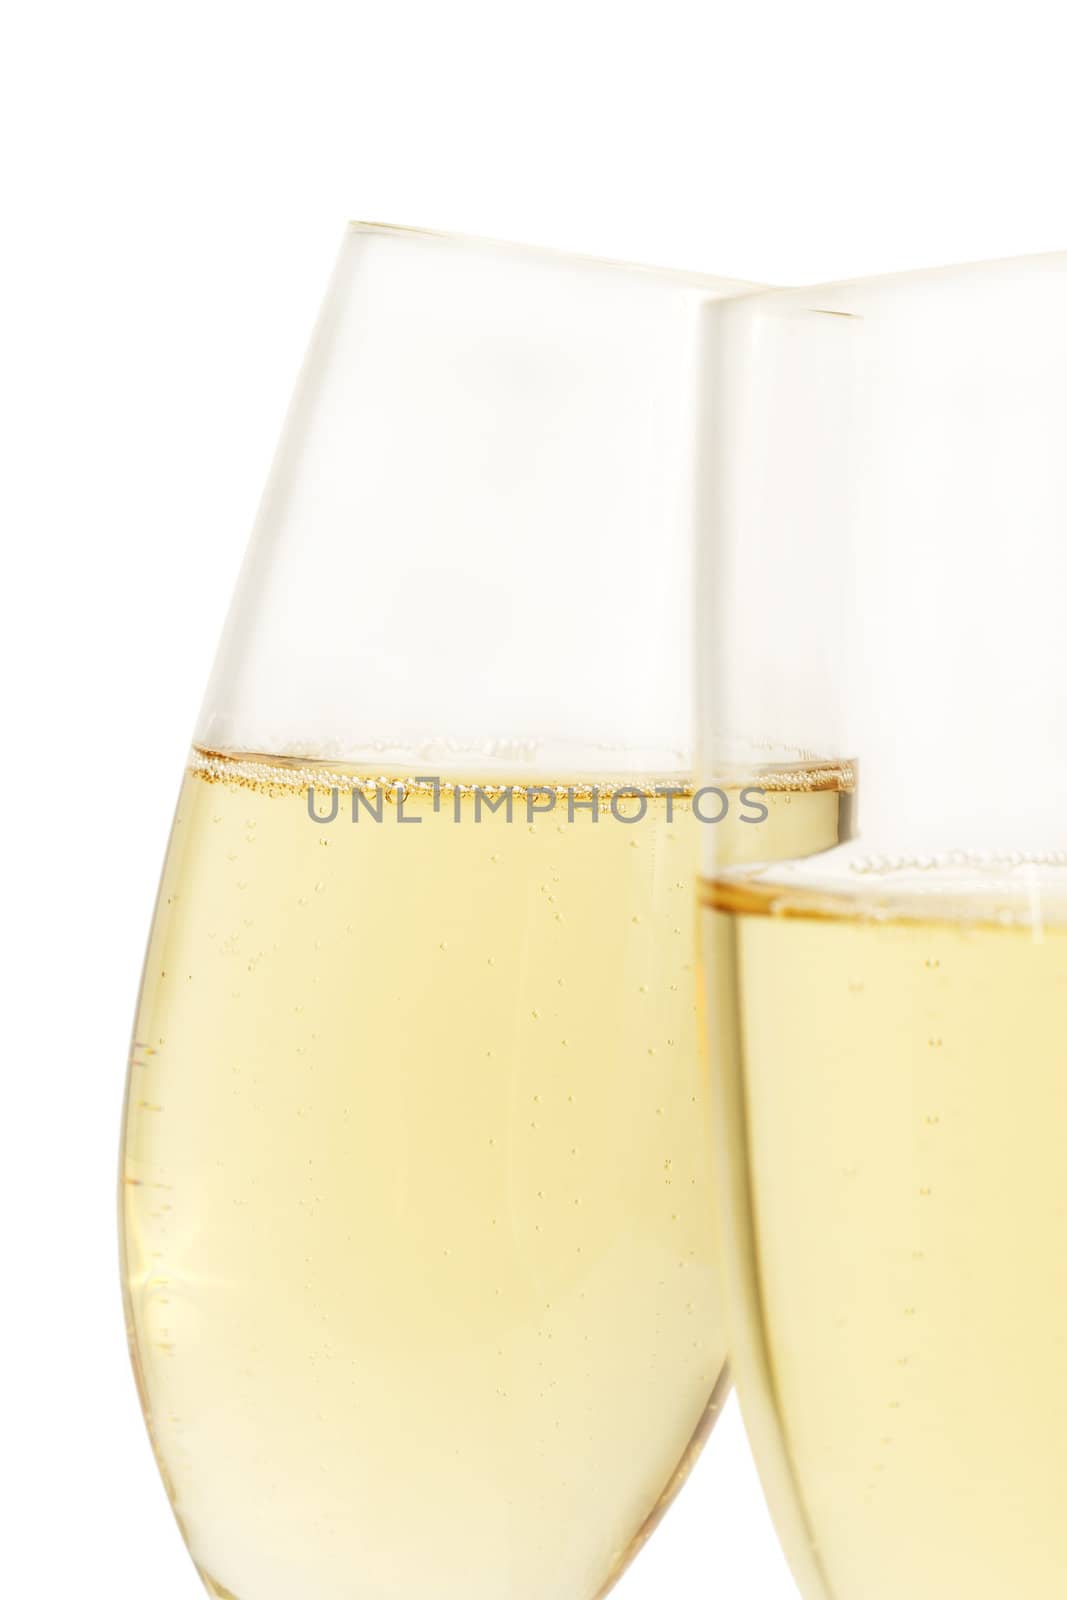 aslope glass of champagne behind other on white background